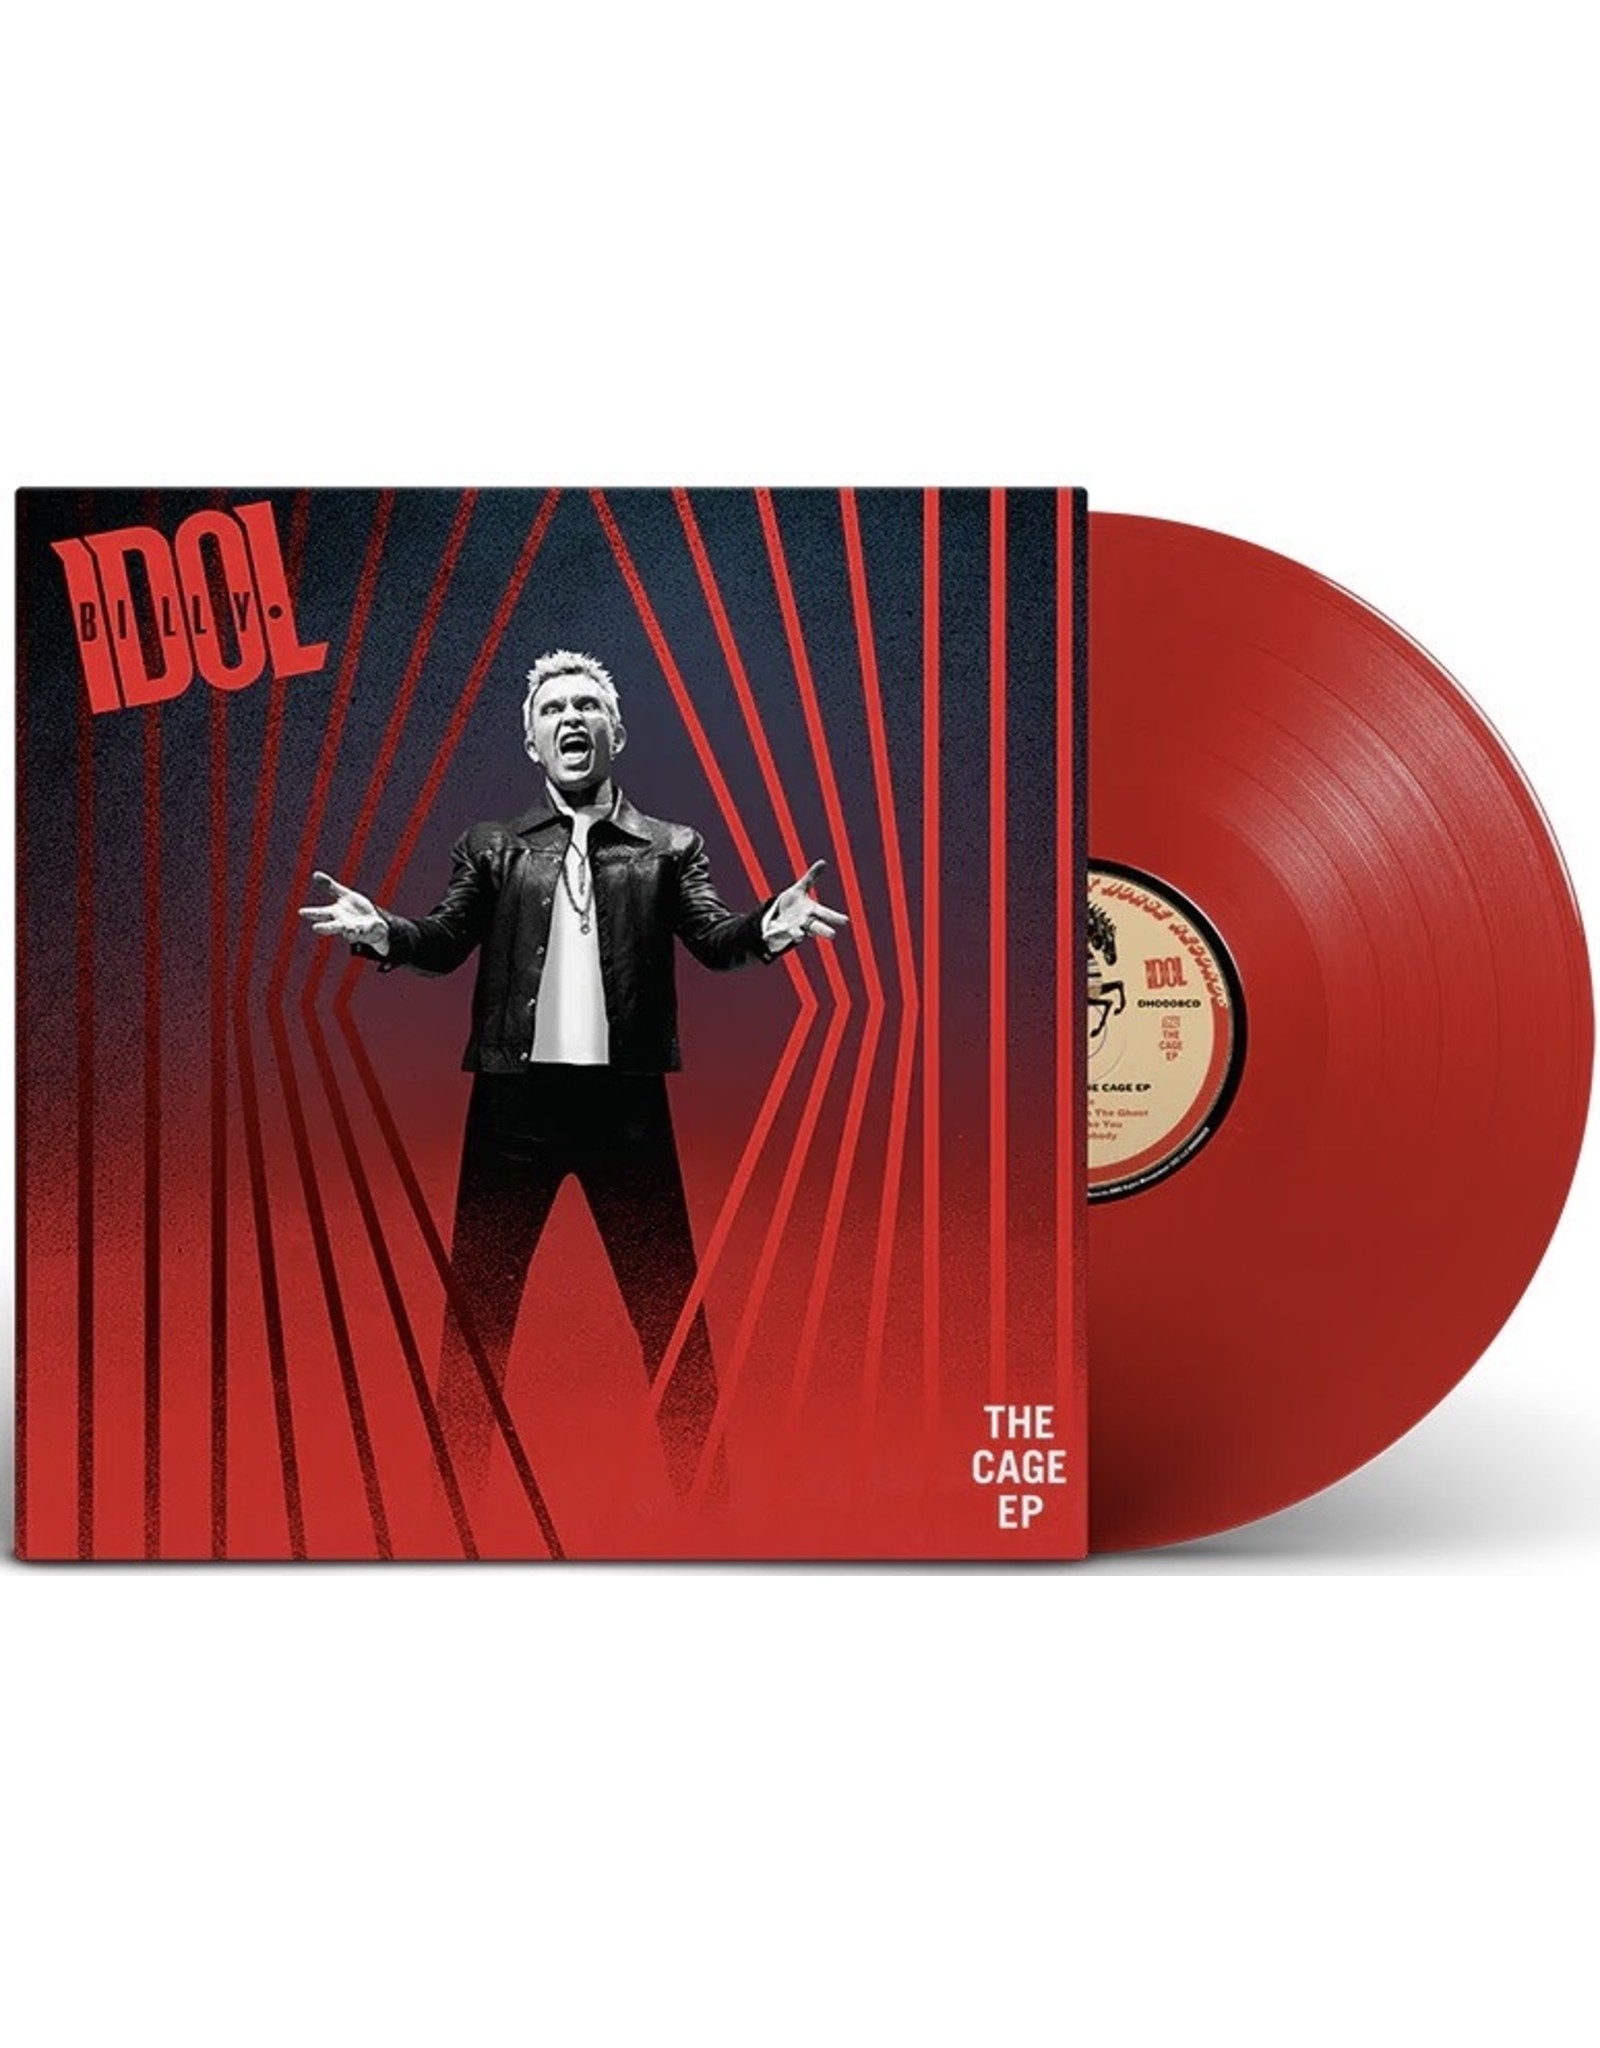 Idol, Billy - The Cage EP (Ltd. Edition Red Vinyl) LP